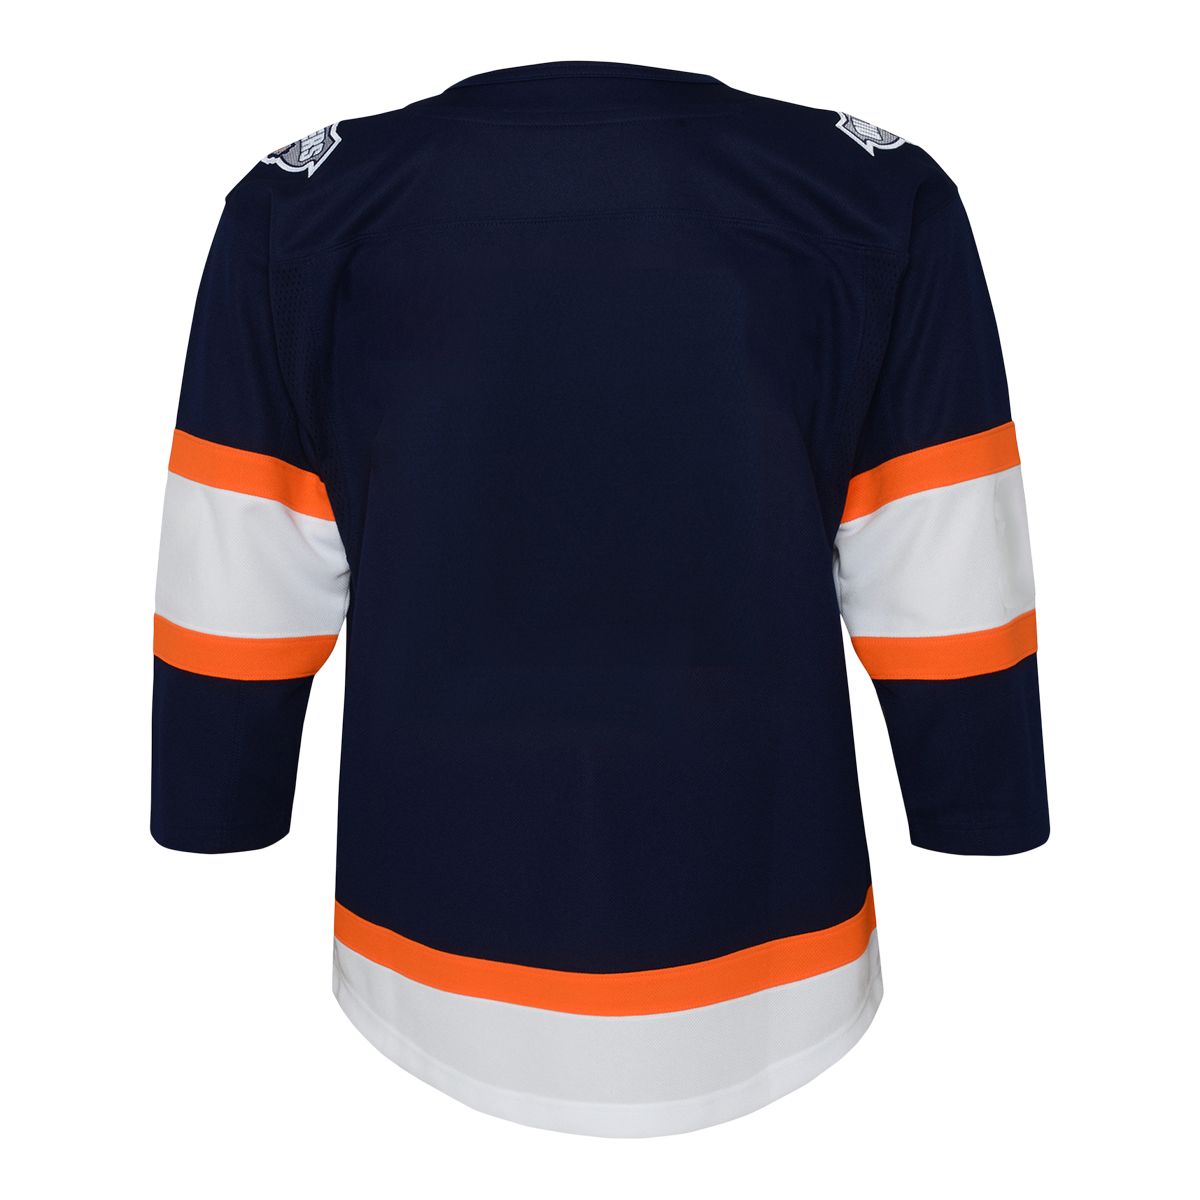 Outerstuff Youth Royal Edmonton Oilers Home Replica Custom Jersey Size: Large